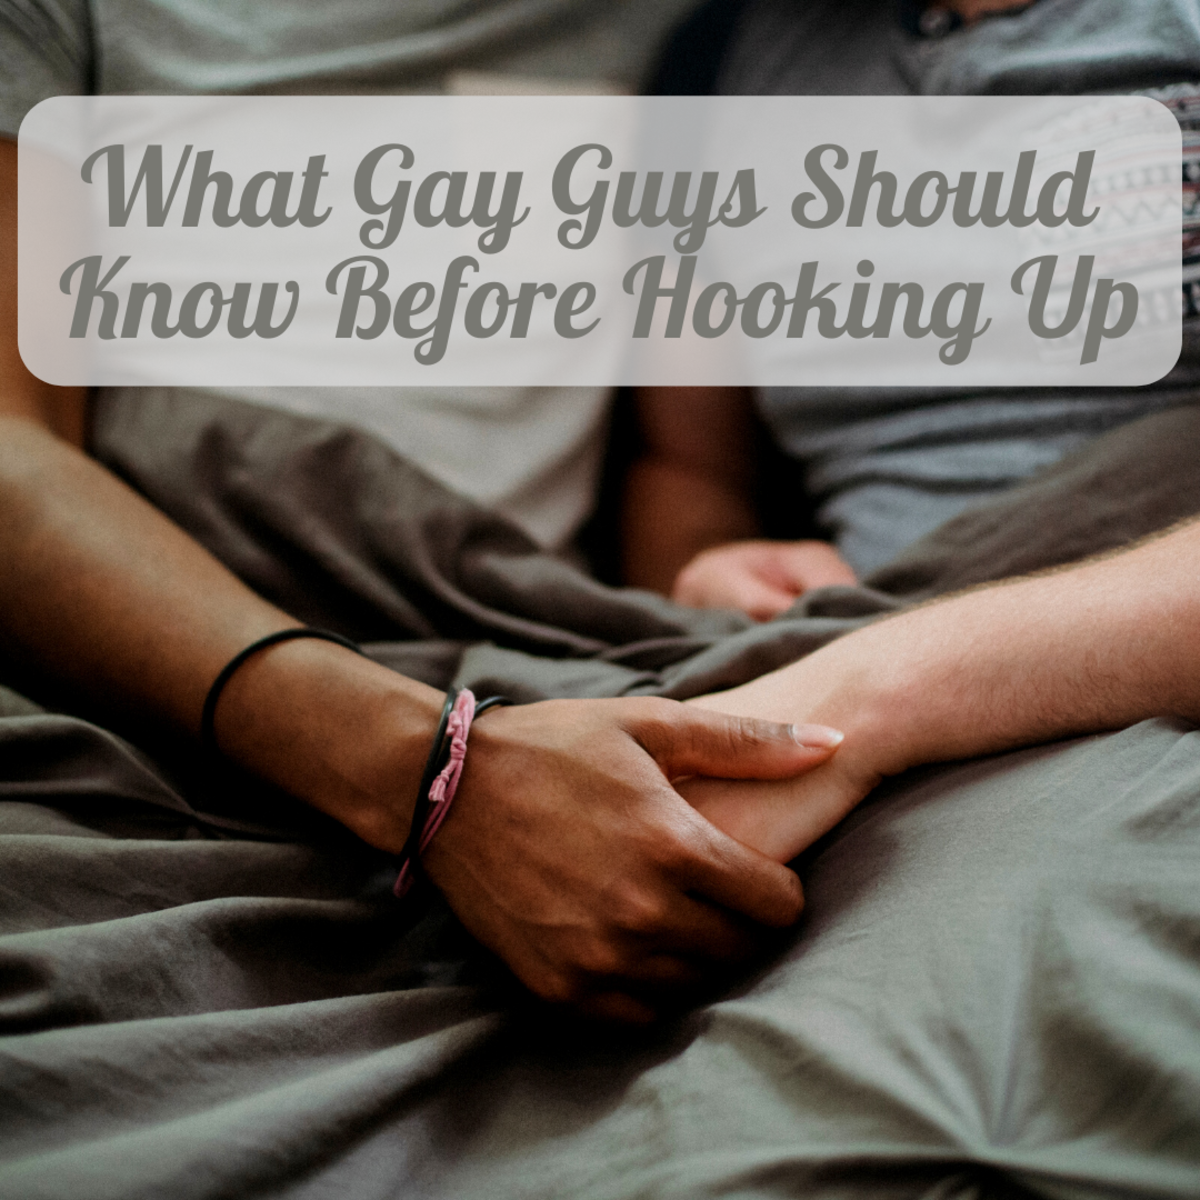 Getting ready to hook up with someone for the first time? Here are 10 things you should know.